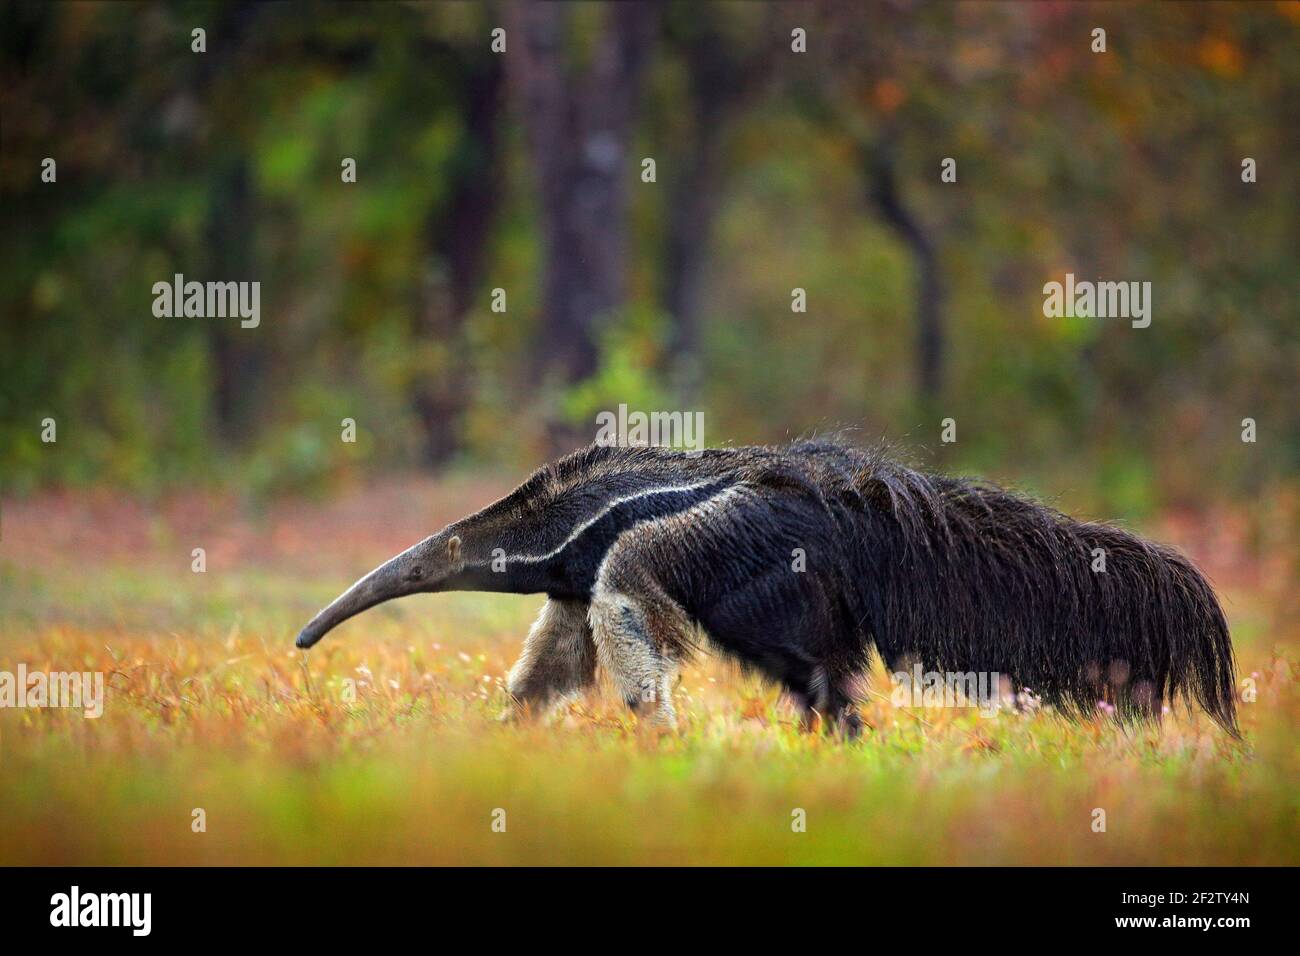 Anteater, cute animal from Brazil. Running Giant Anteater, Myrmecophaga tridactyla, animal with long tail and log nose, in nature forest habitat, Pant Stock Photo